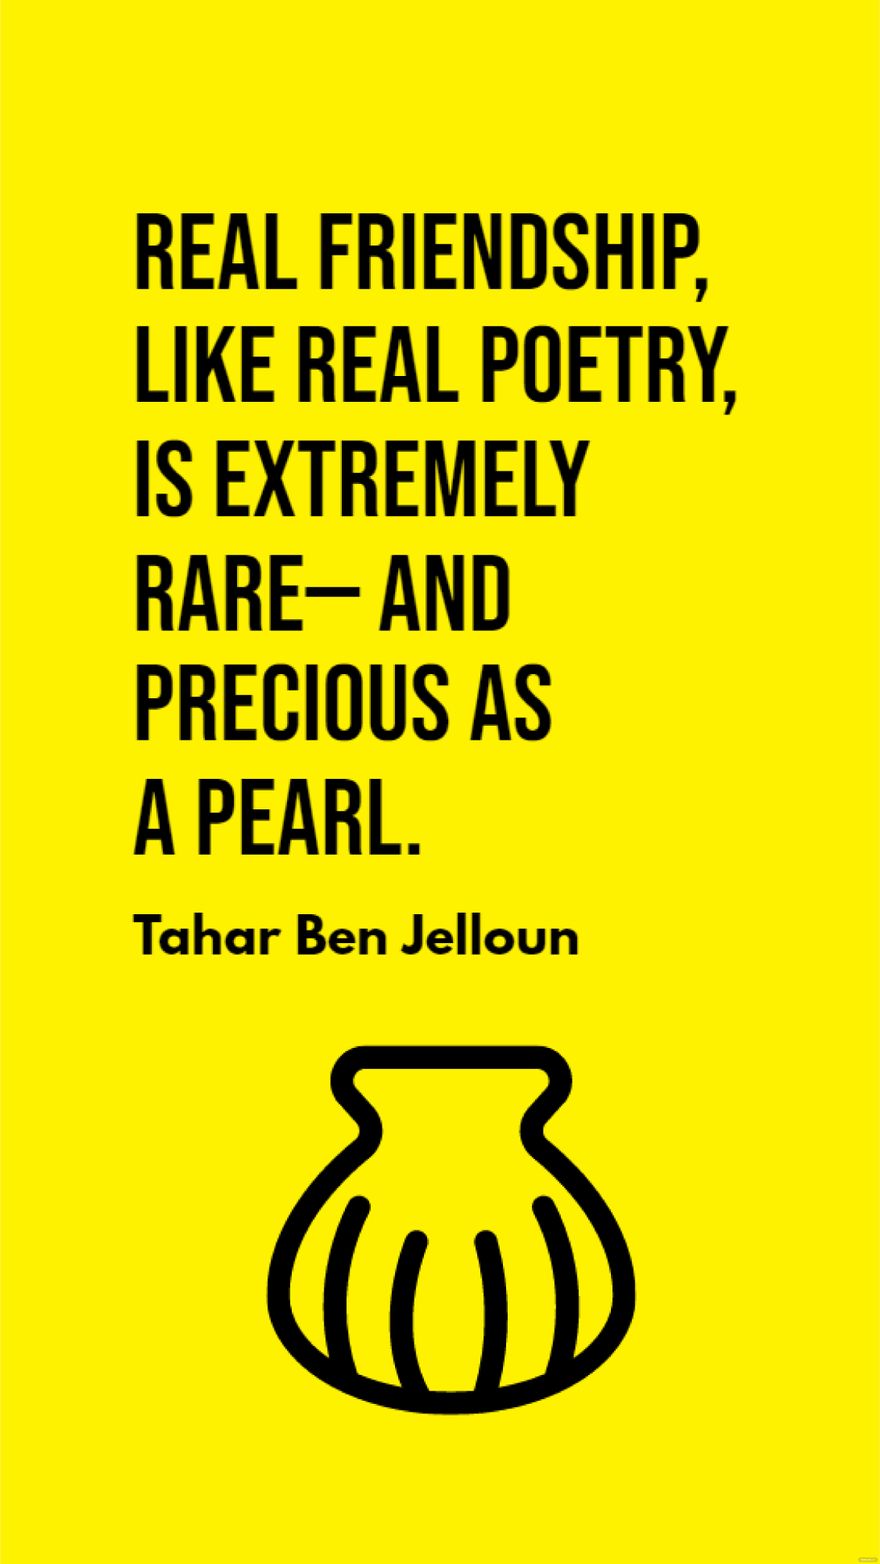 Tahar Ben Jelloun - Real friendship, like real poetry, is extremely rare – and precious as a pearl.